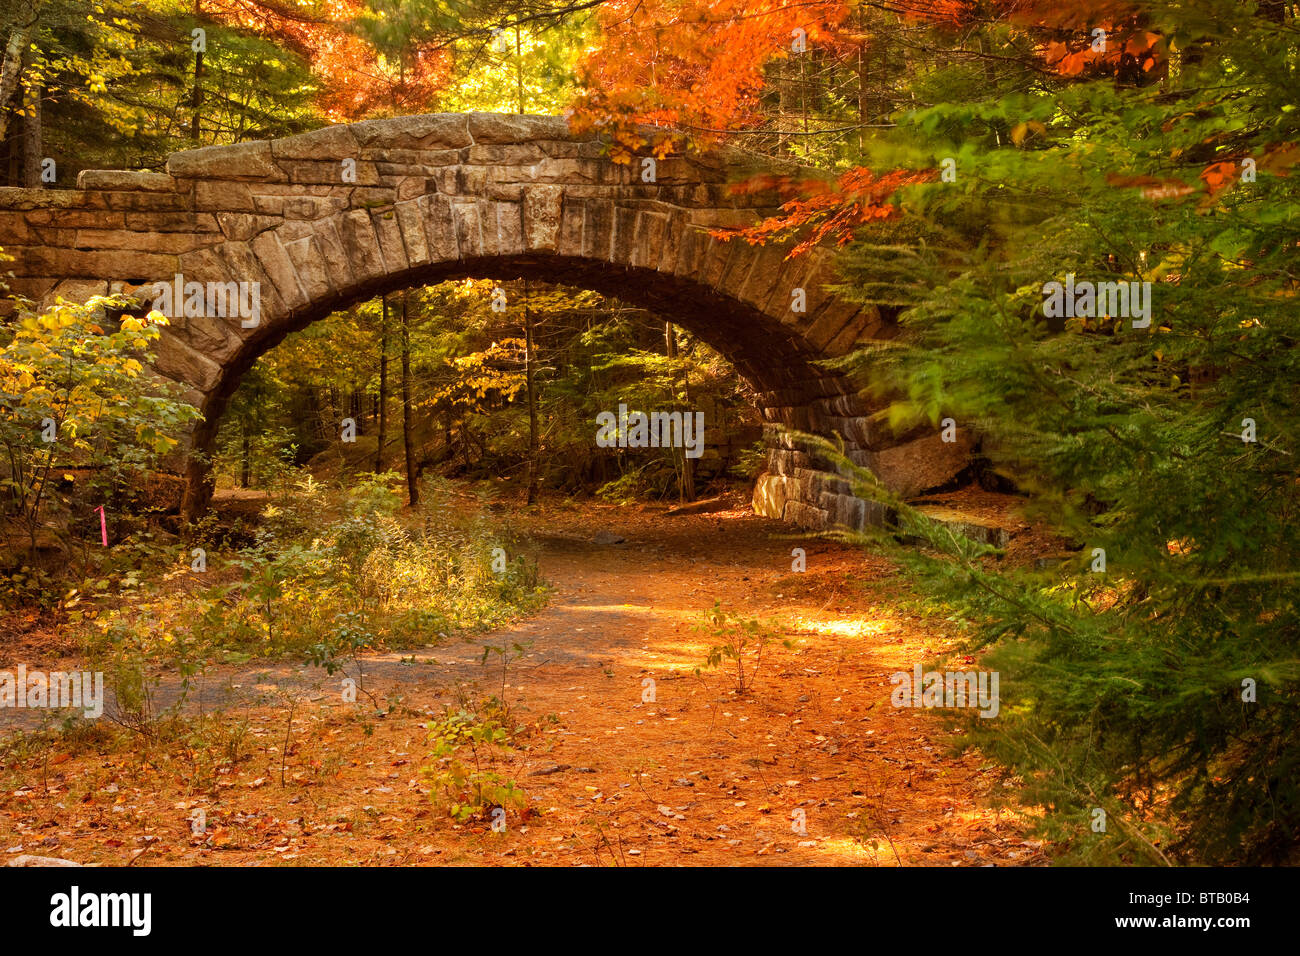 Stone Bridge - part of the Carriage Roads system built by John D. Rockefeller throughout  Acadia National Park, Maine, USA Stock Photo